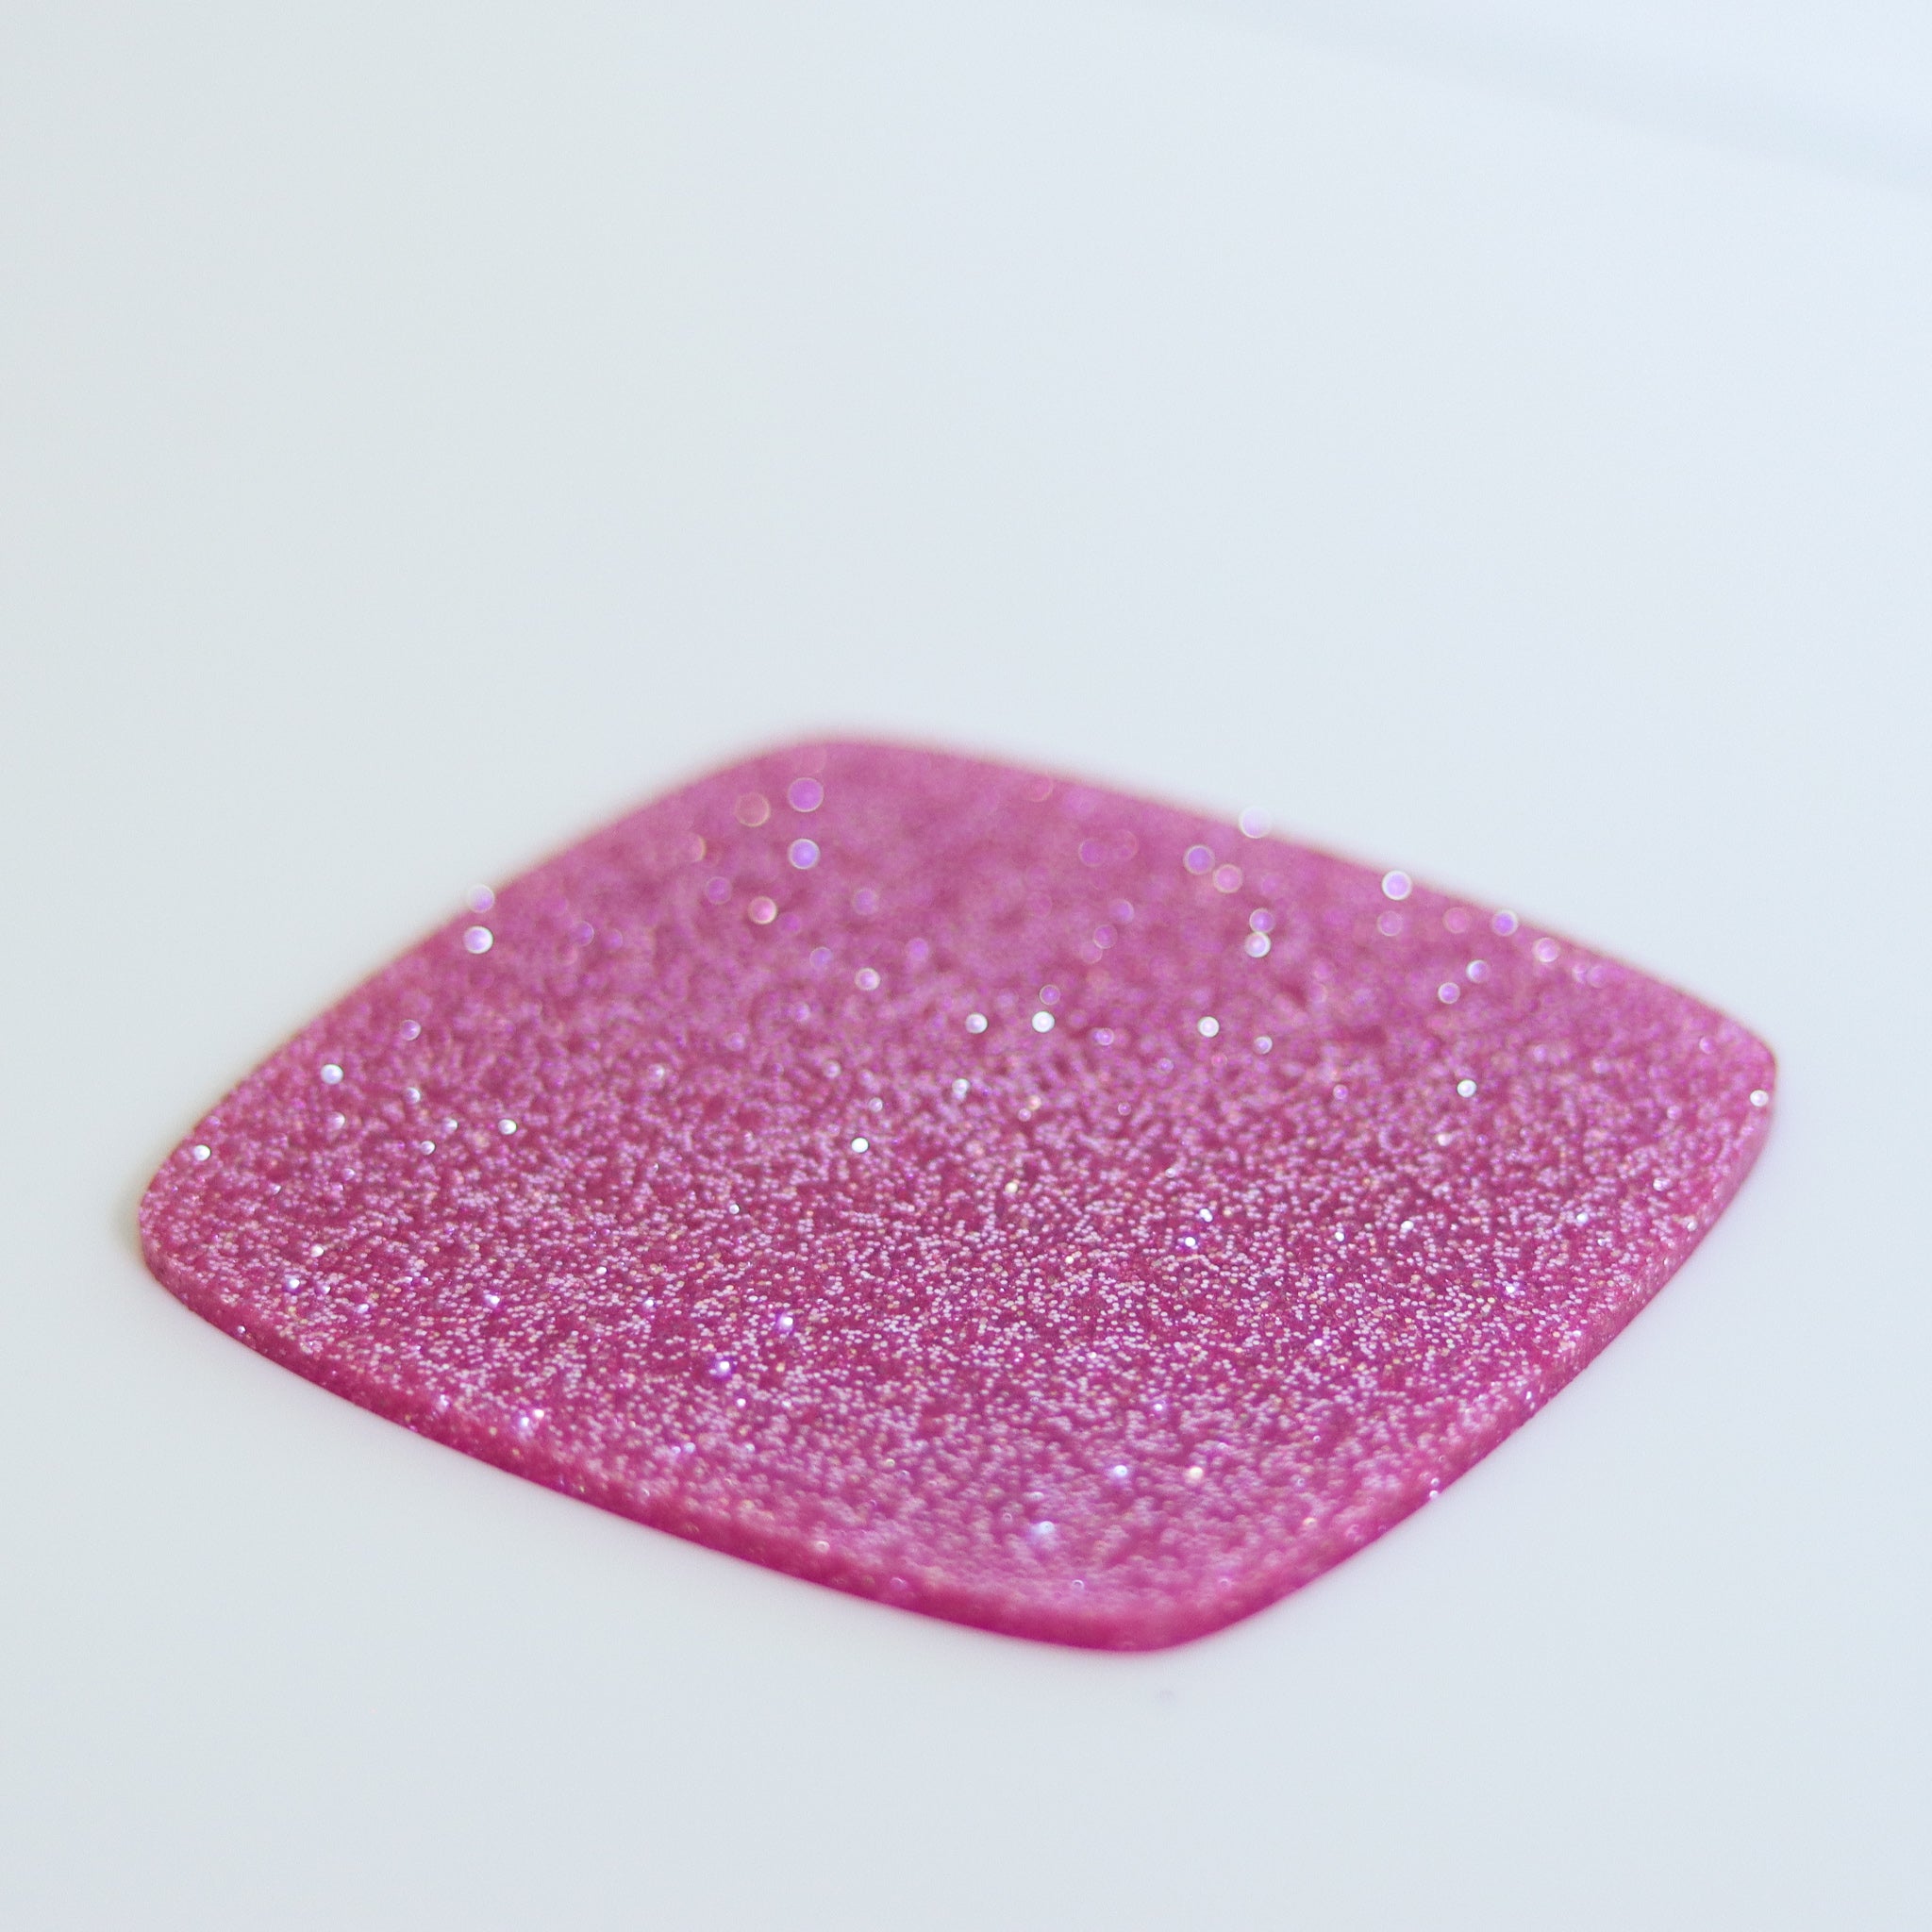  8 Hot Pink Glitter Number 1 Prop : Handmade Products